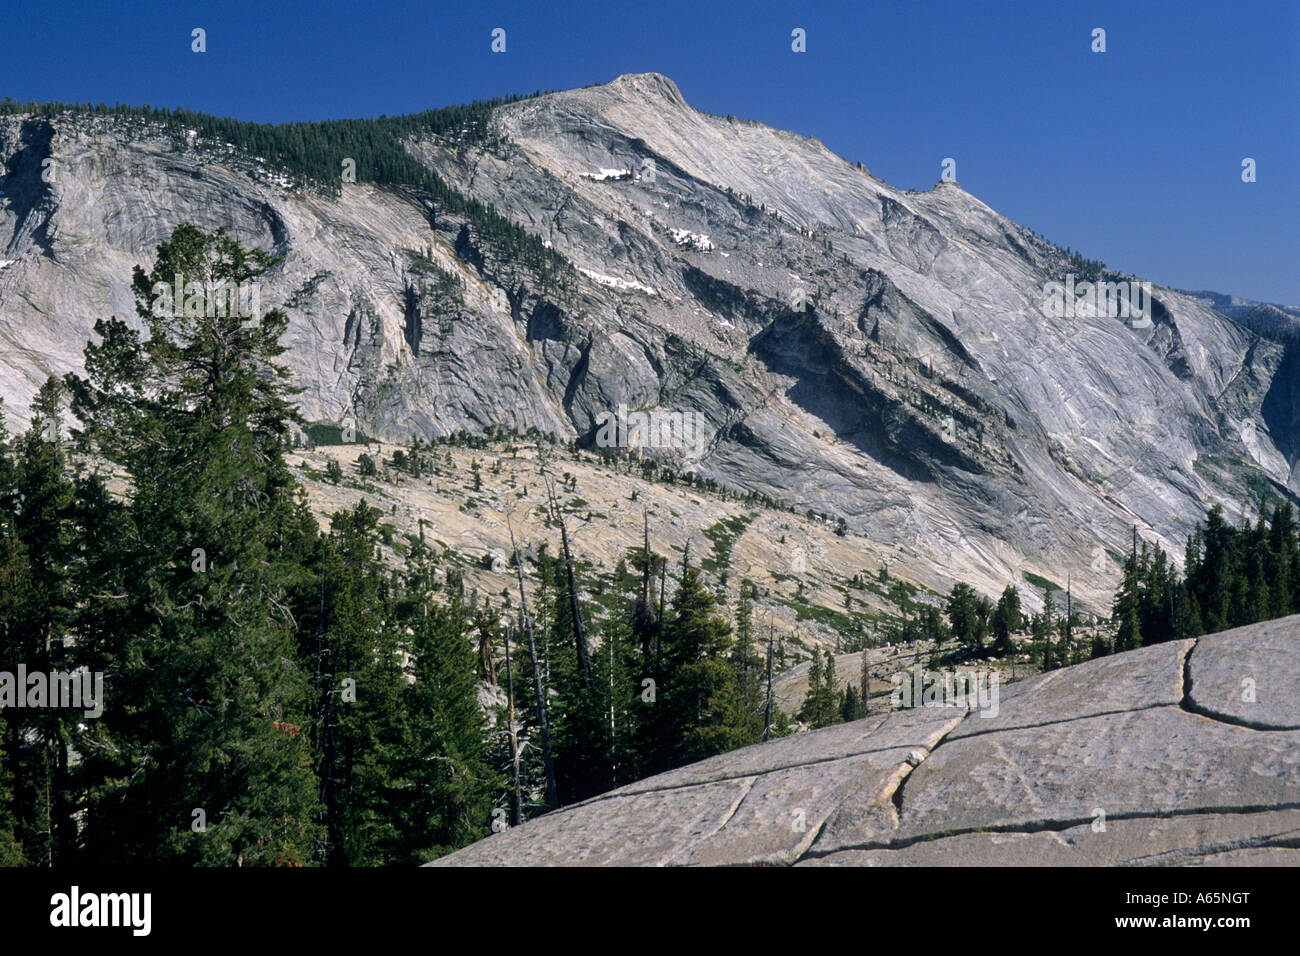 Huge granite escarpment of Clouds Rest from Olmsted Point Tioga Pass Road Yosemite National Park CALIFORNIA Stock Photo